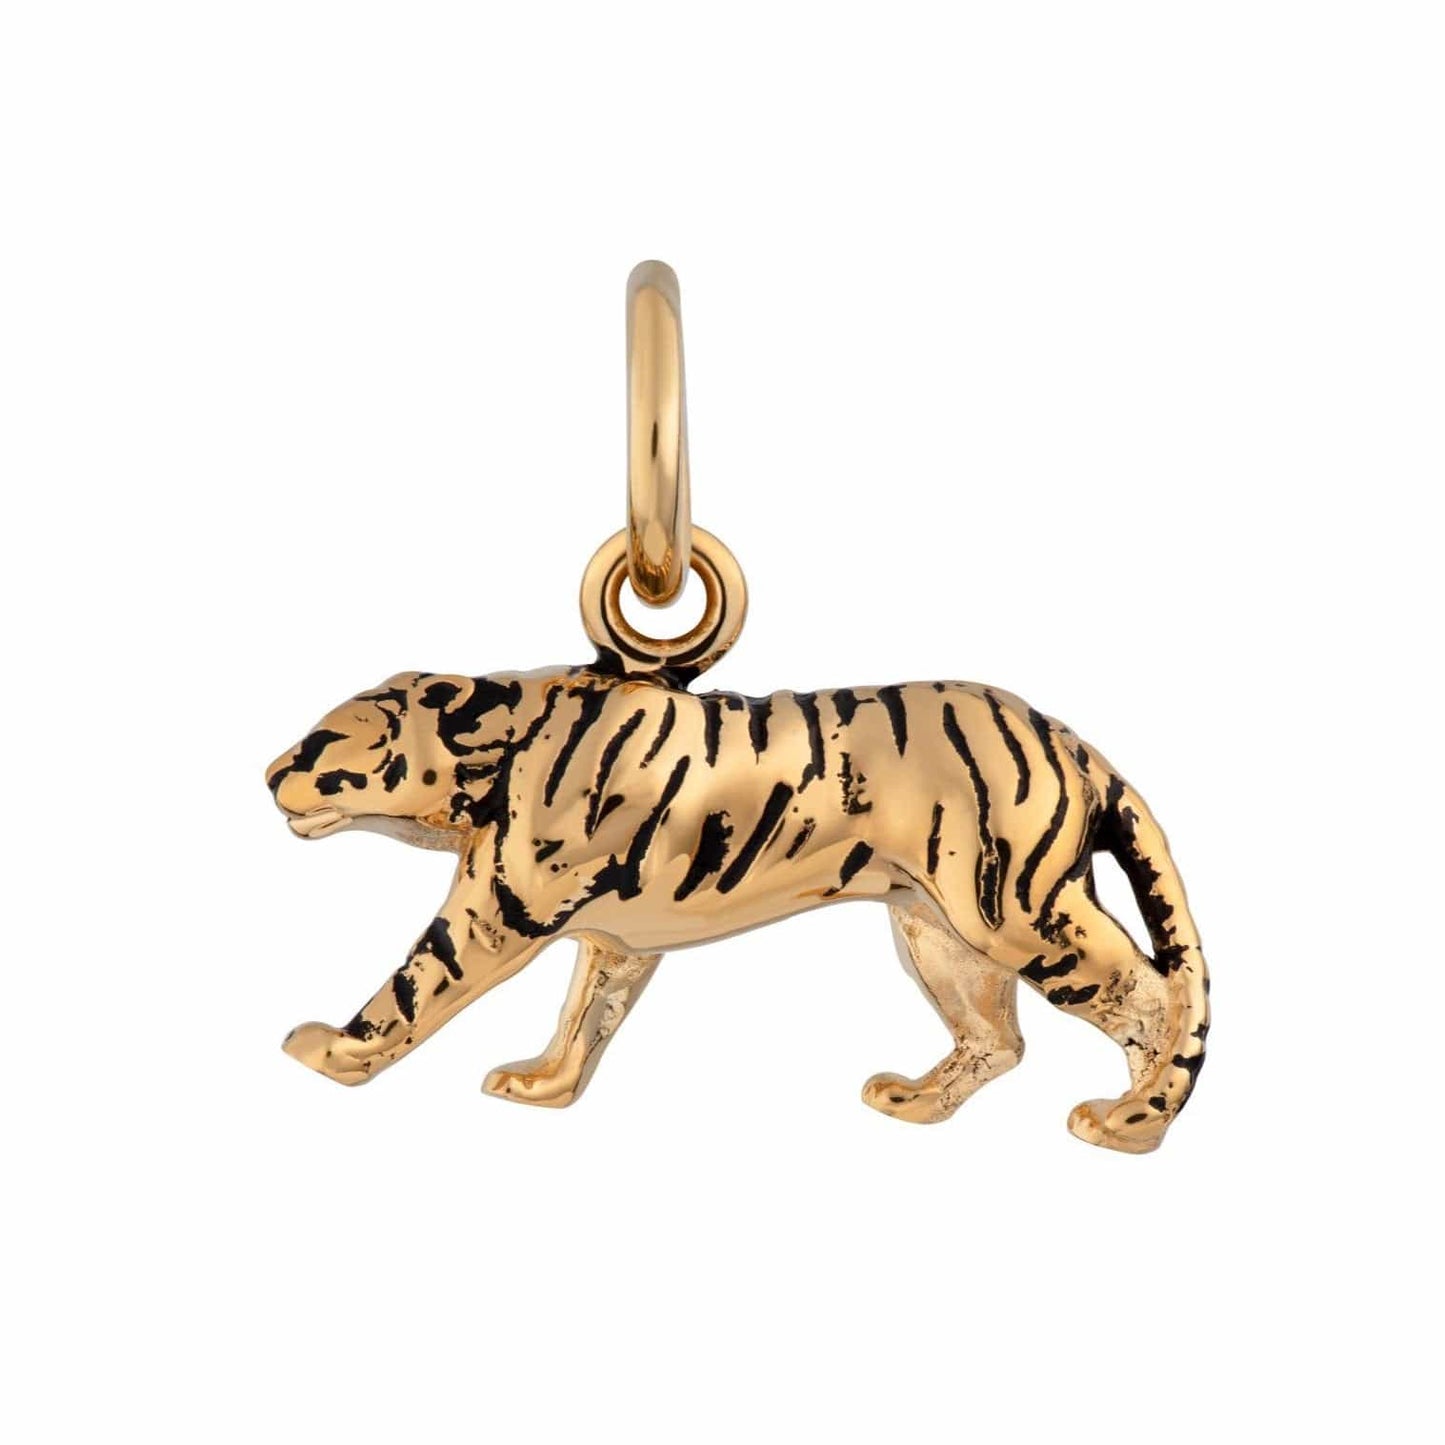 CHM-GPL Tiger Charm - 18k Gold Plated Sterling Silver